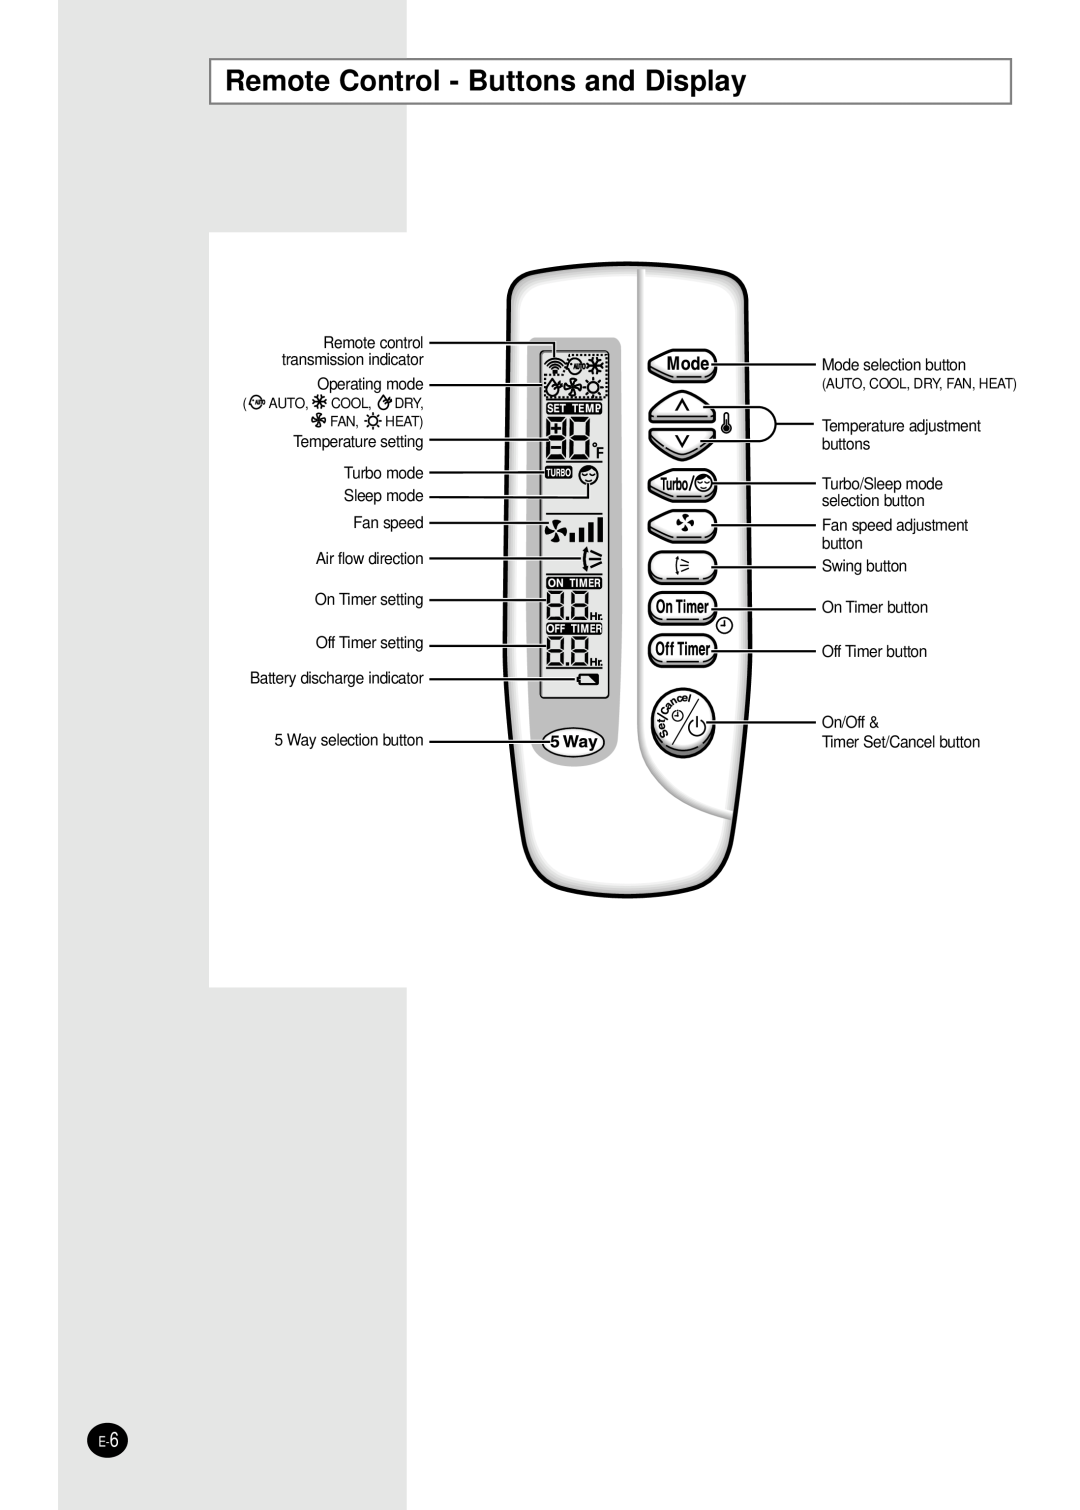 Samsung AD18B1C09 installation manual Remote Control - Buttons and Display 